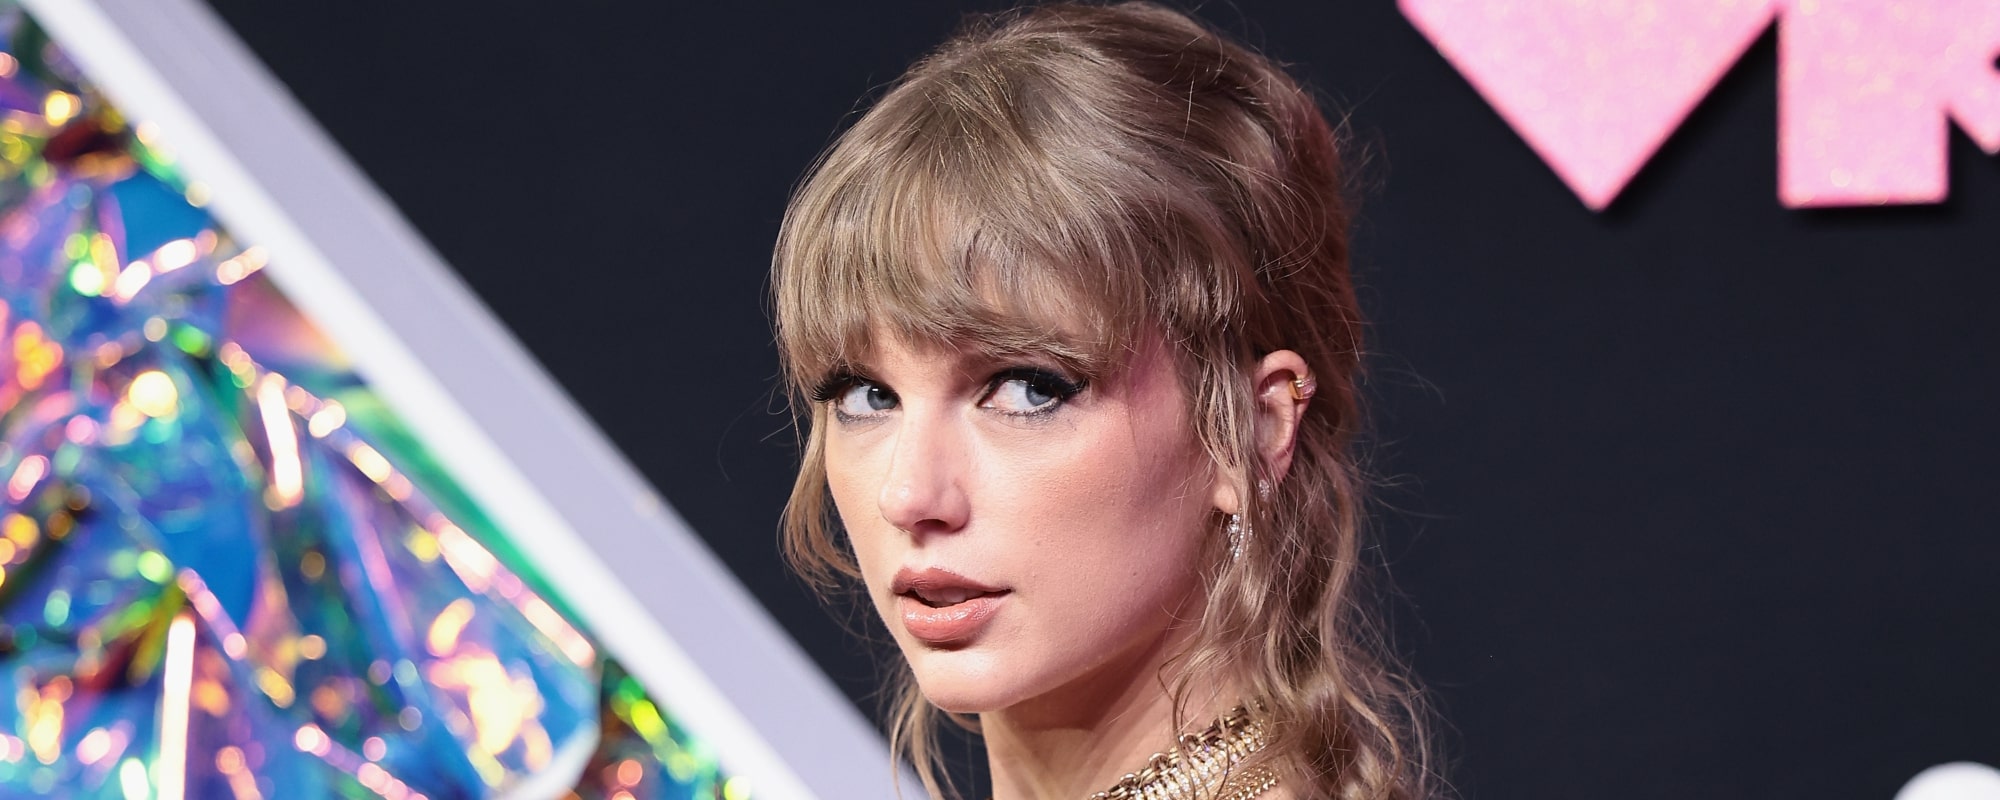 Federal Reserve credits Taylor Swift with boosting hotel revenues through  her blockbuster Eras Tour